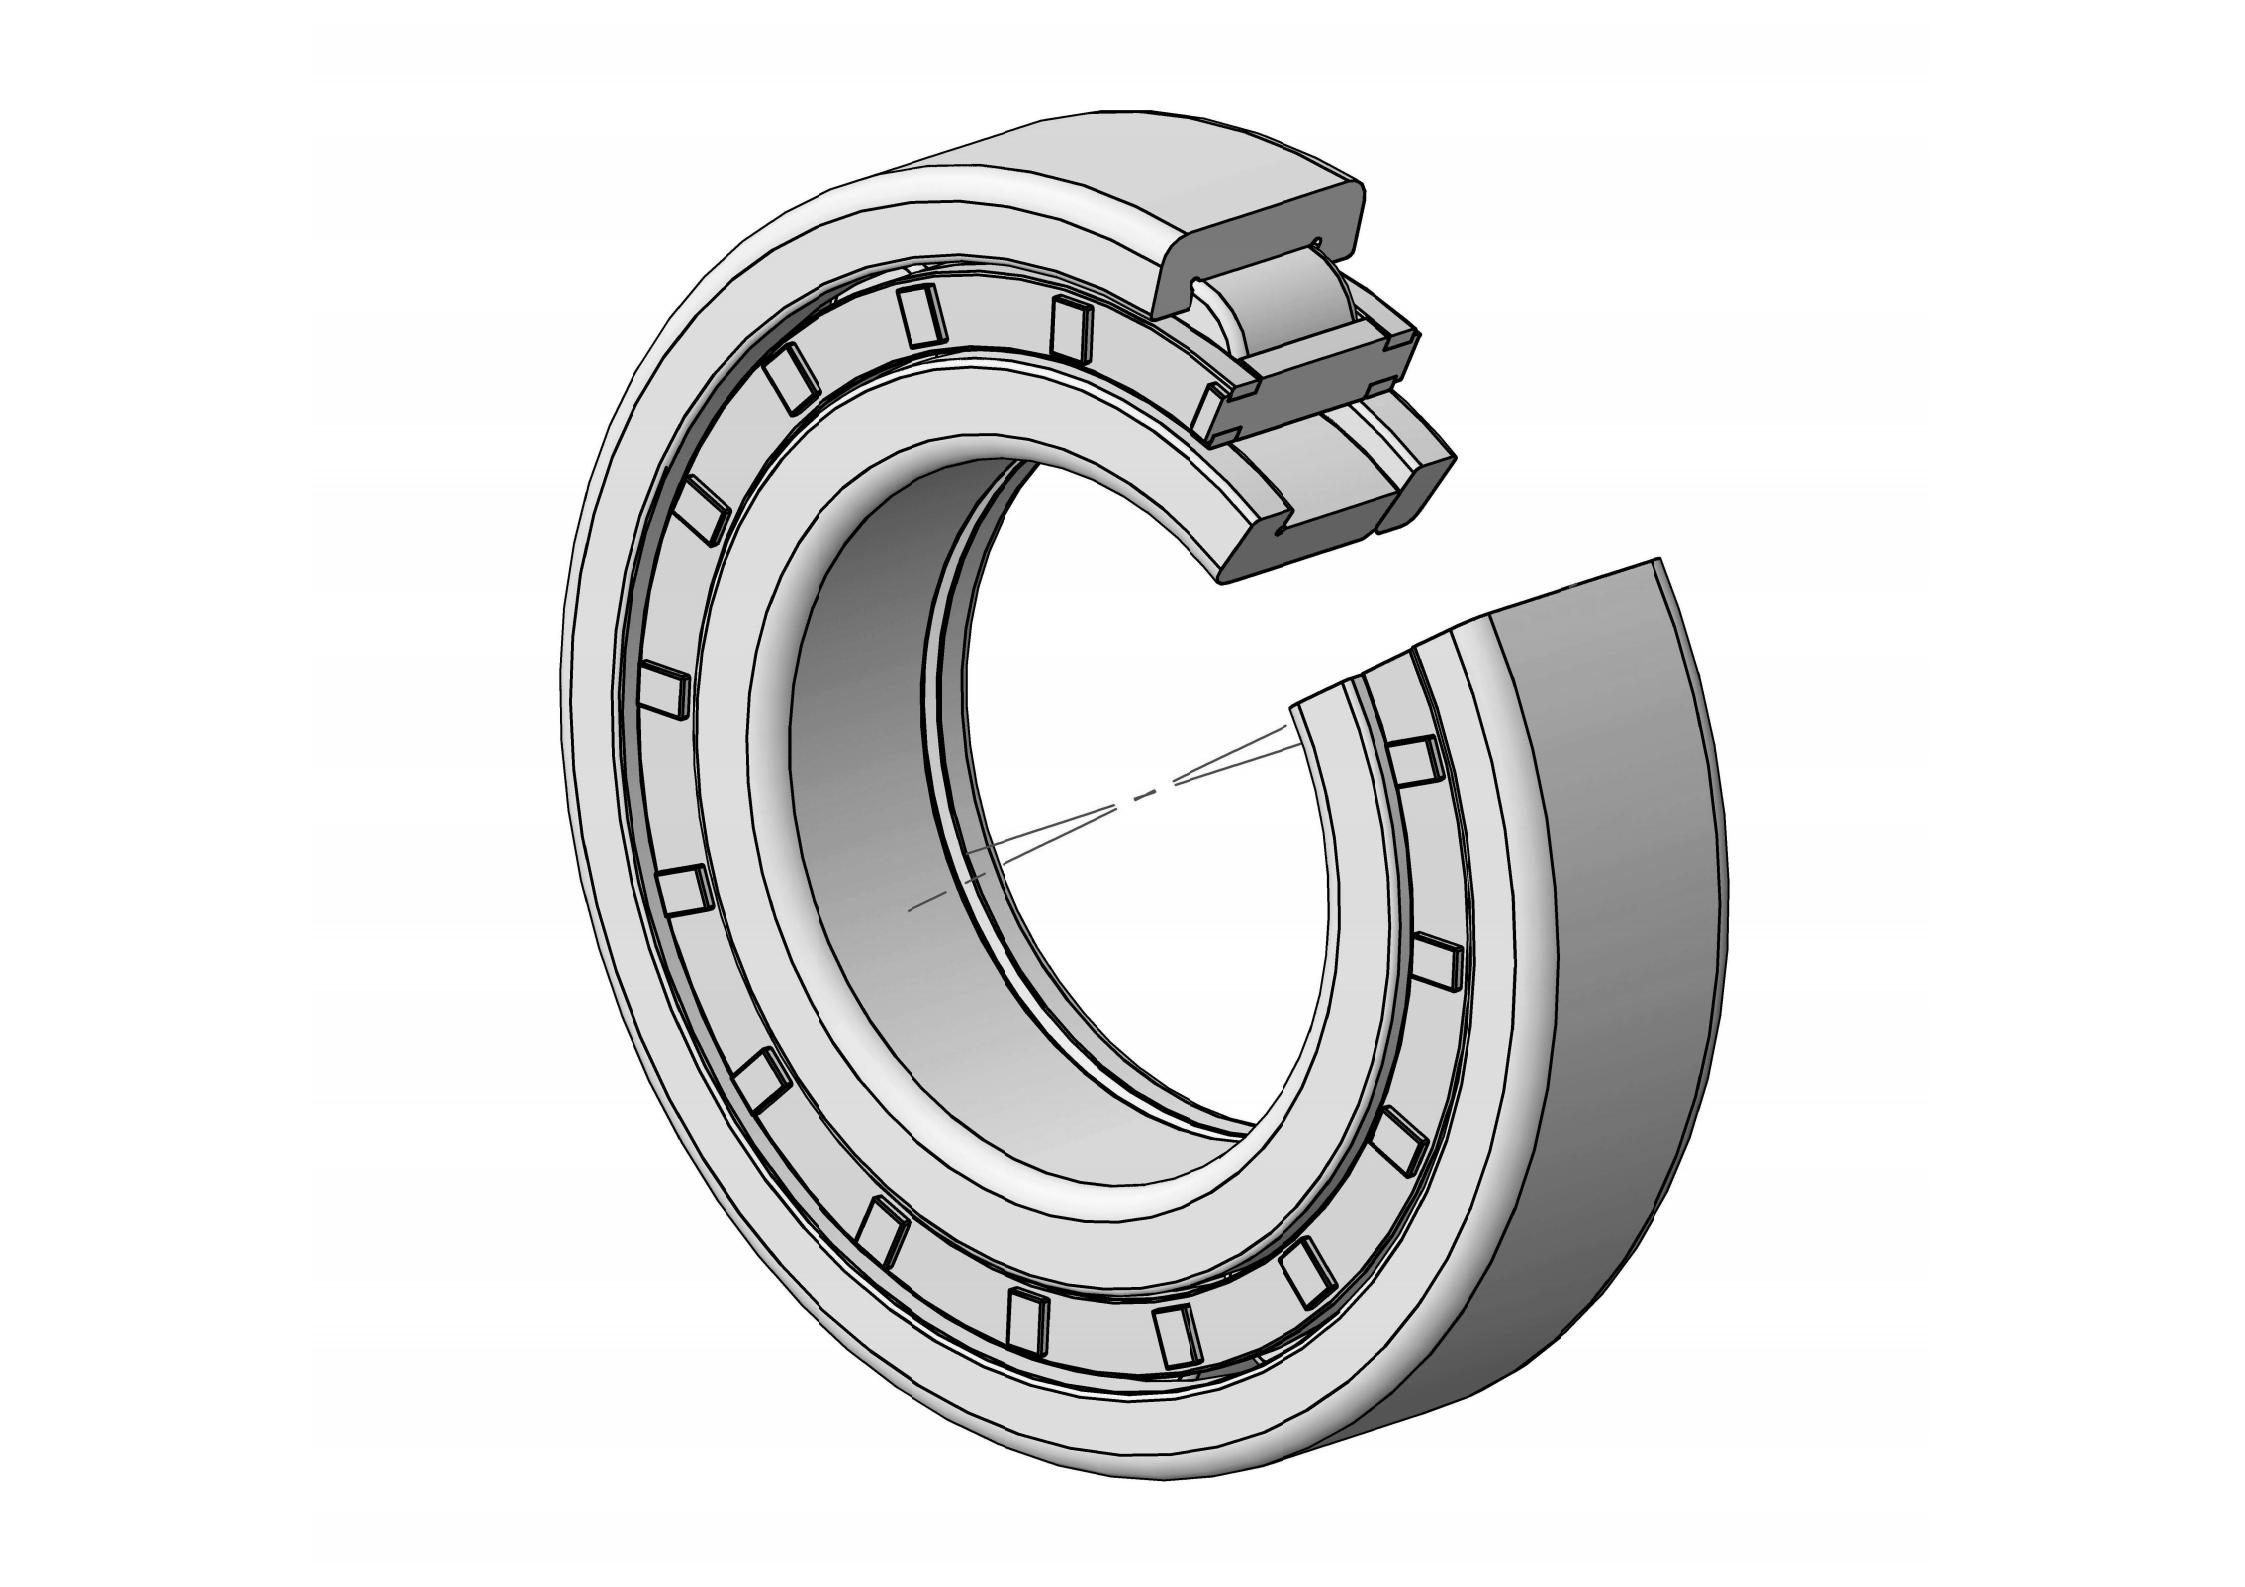 NUP318-EM Single Row Cylindrical roller bearing 